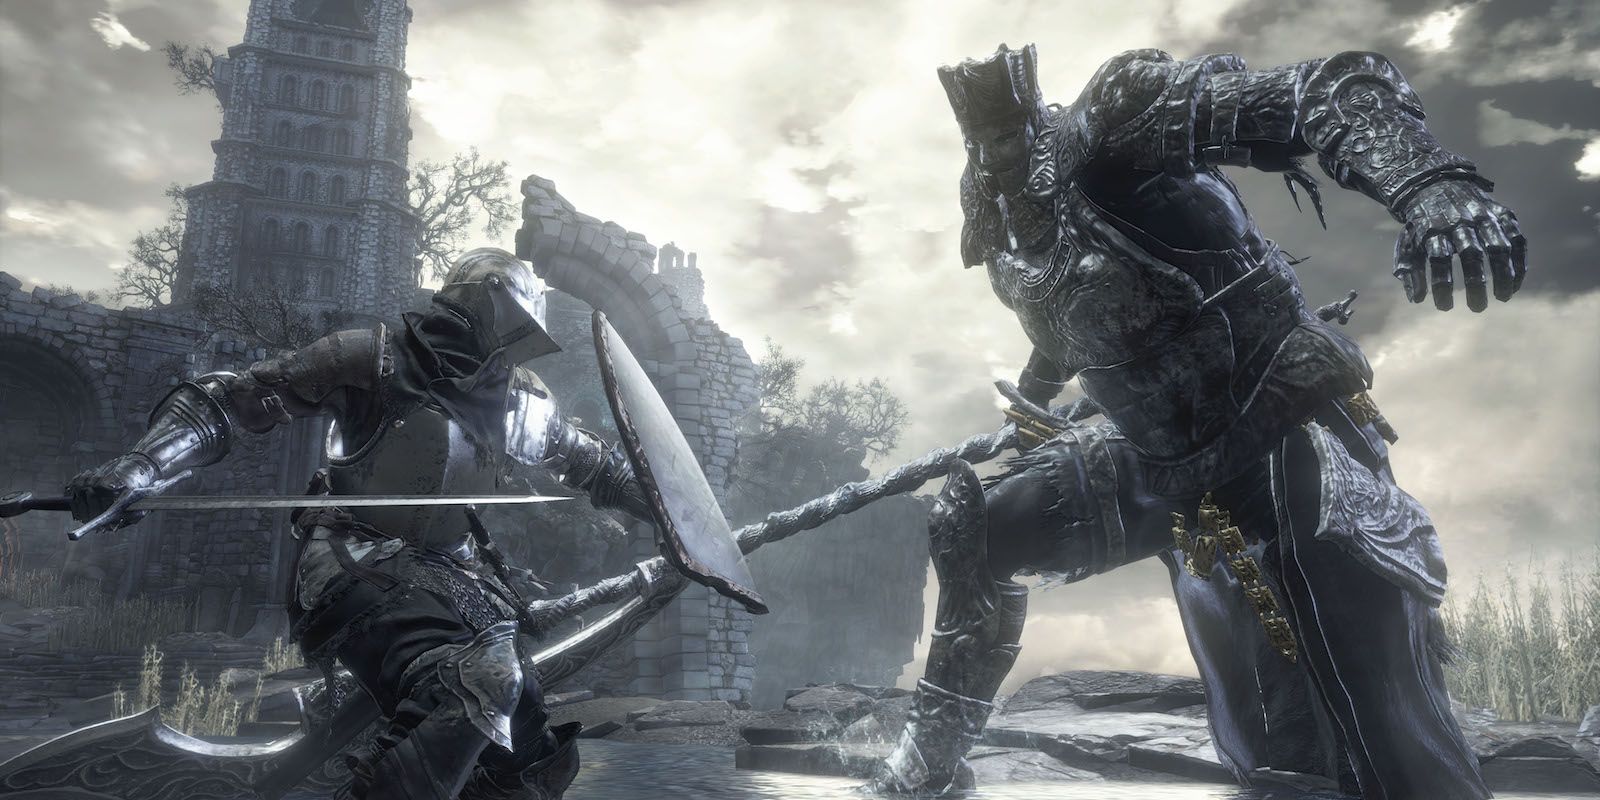 A character fights against Gundyr in Dark Souls 3